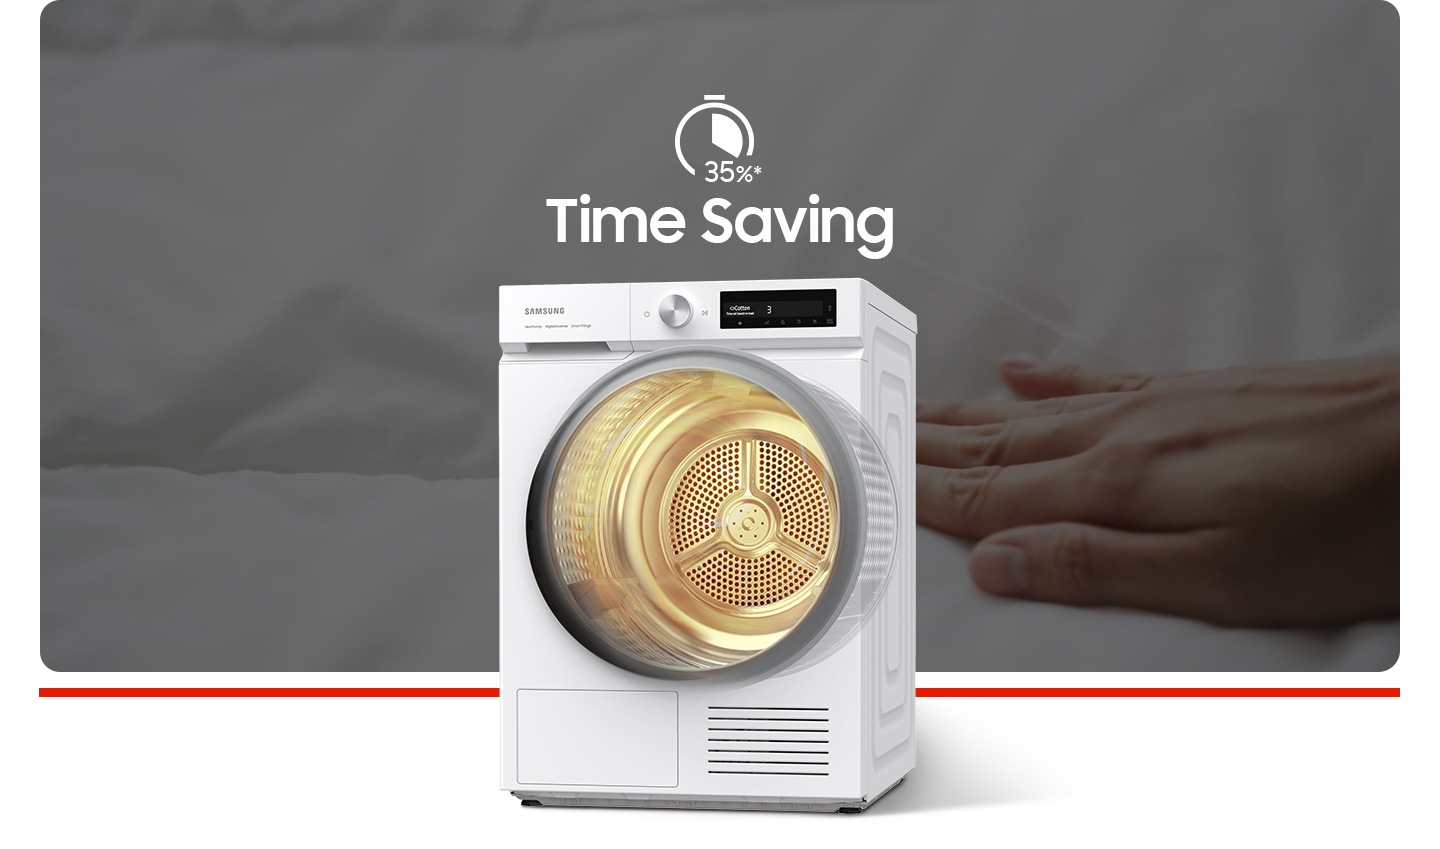 The inverter compressor technology automatically adjusts speed based on the internal temperature and care purposes. Cotton cycle with QuickDrive™ reduces the amount of moisture faster than without QuickDrive™, saving 35%"* drying time.